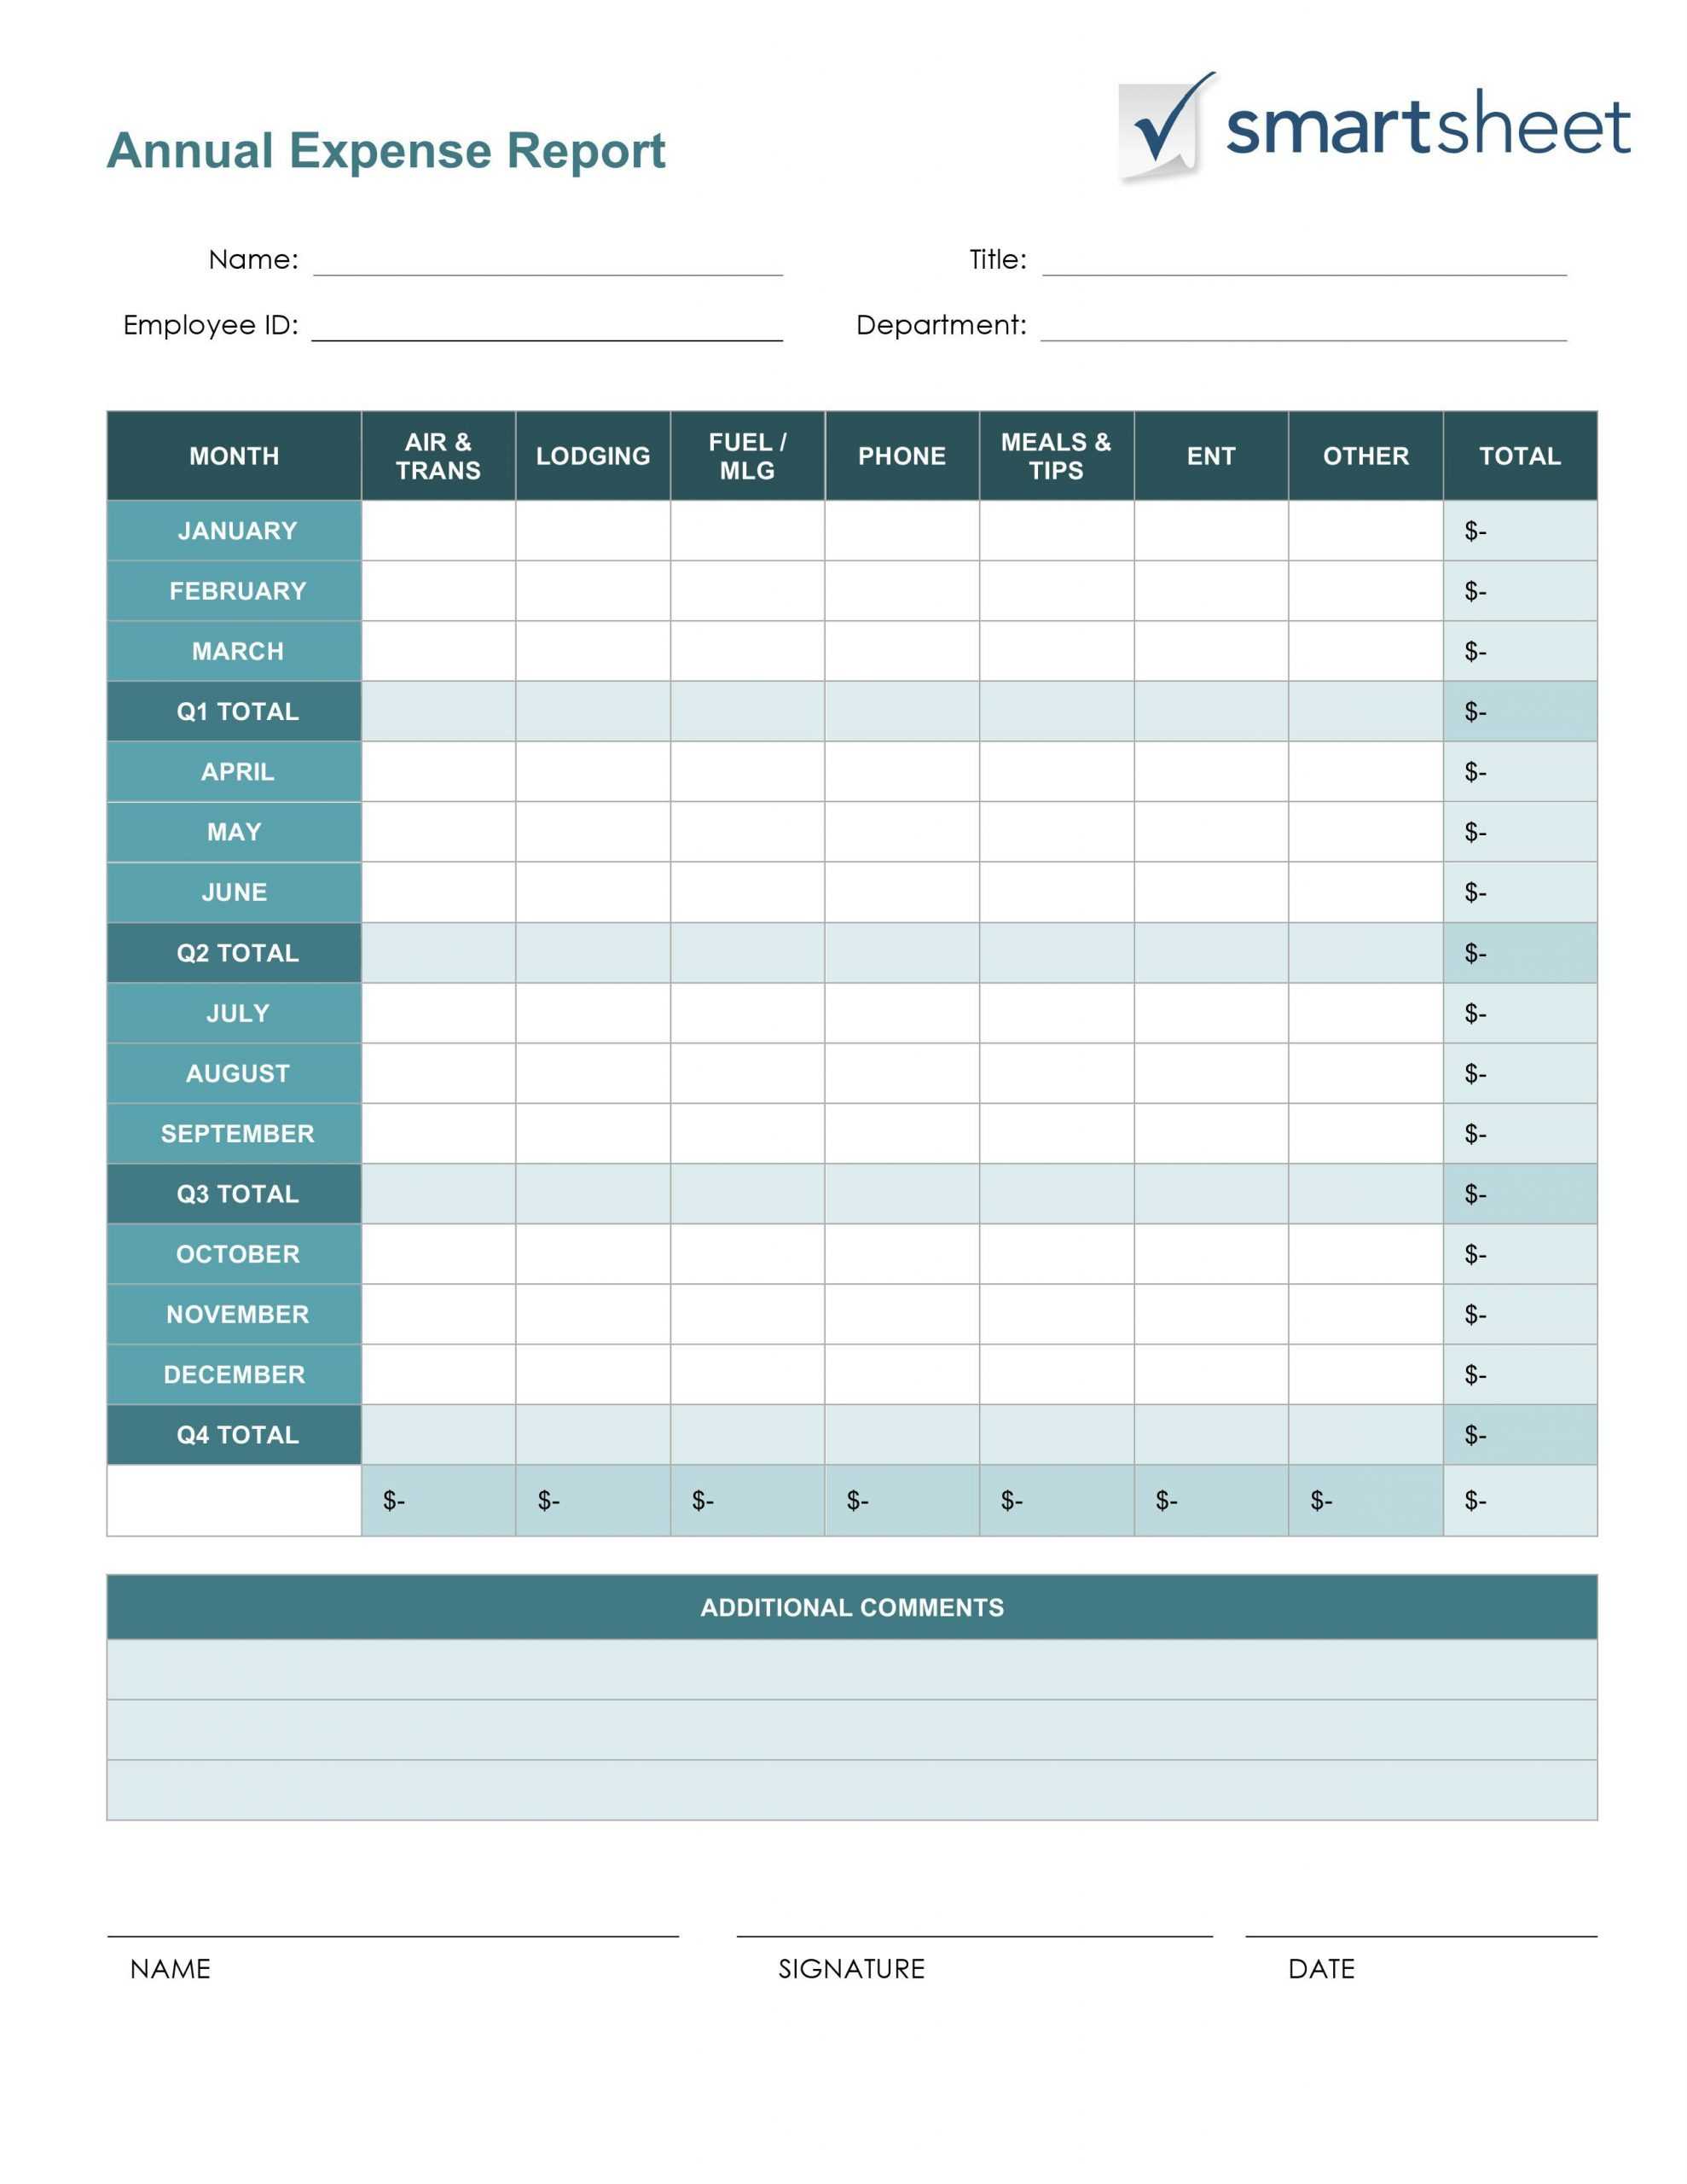 Sample Excel Budget Spreadsheet For Small Business Example For Expense Report Template Excel 2010